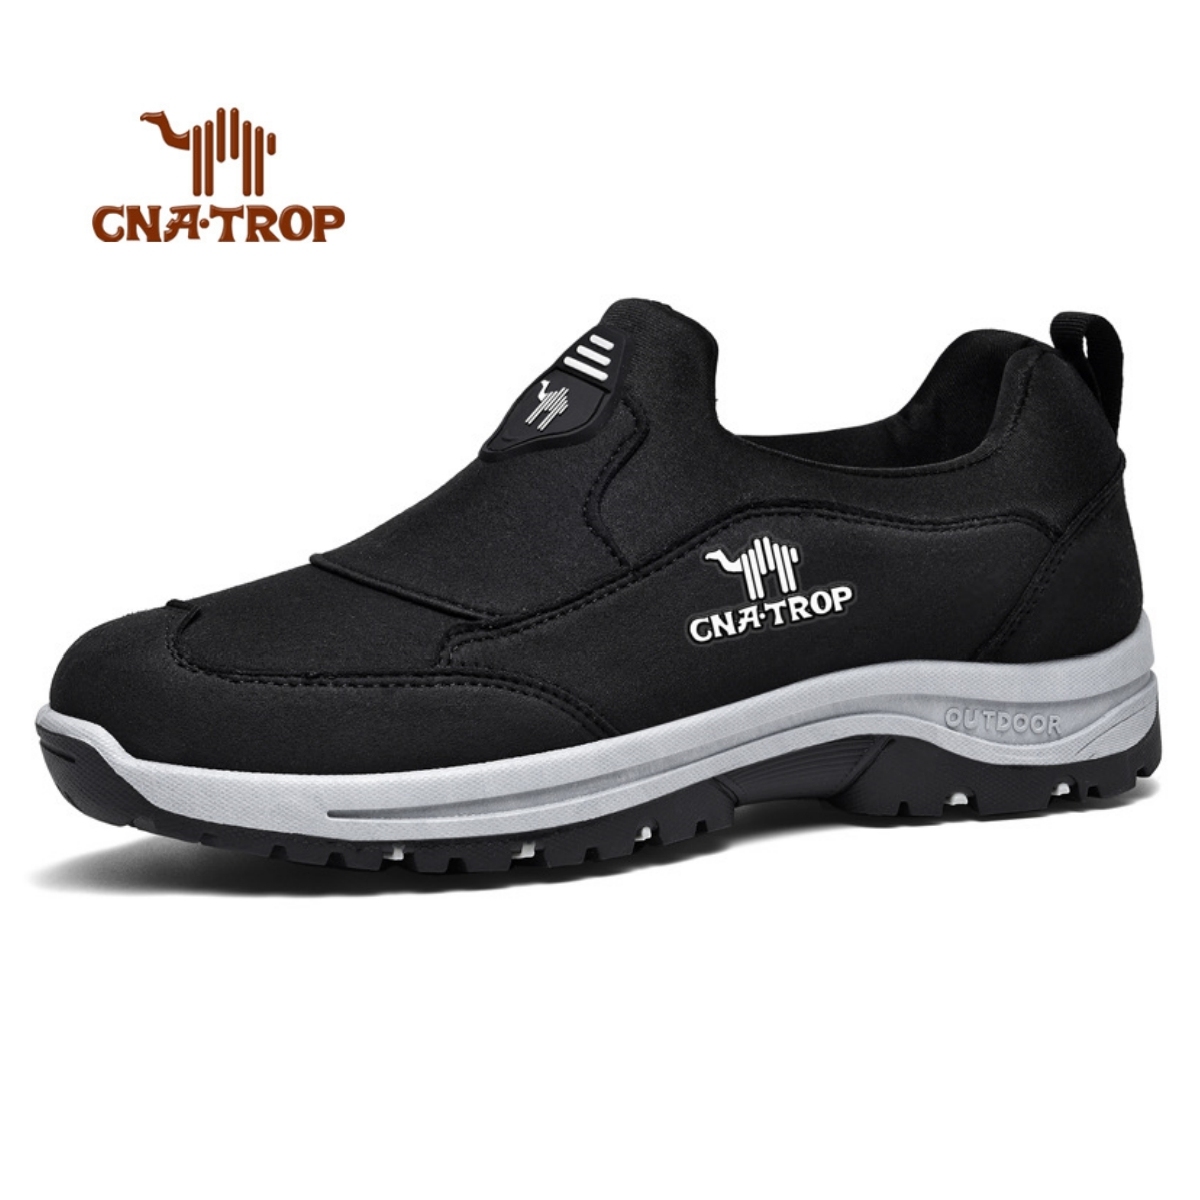 Lightweight and comfortable slip-on soft-soled casual shoes for outdoo